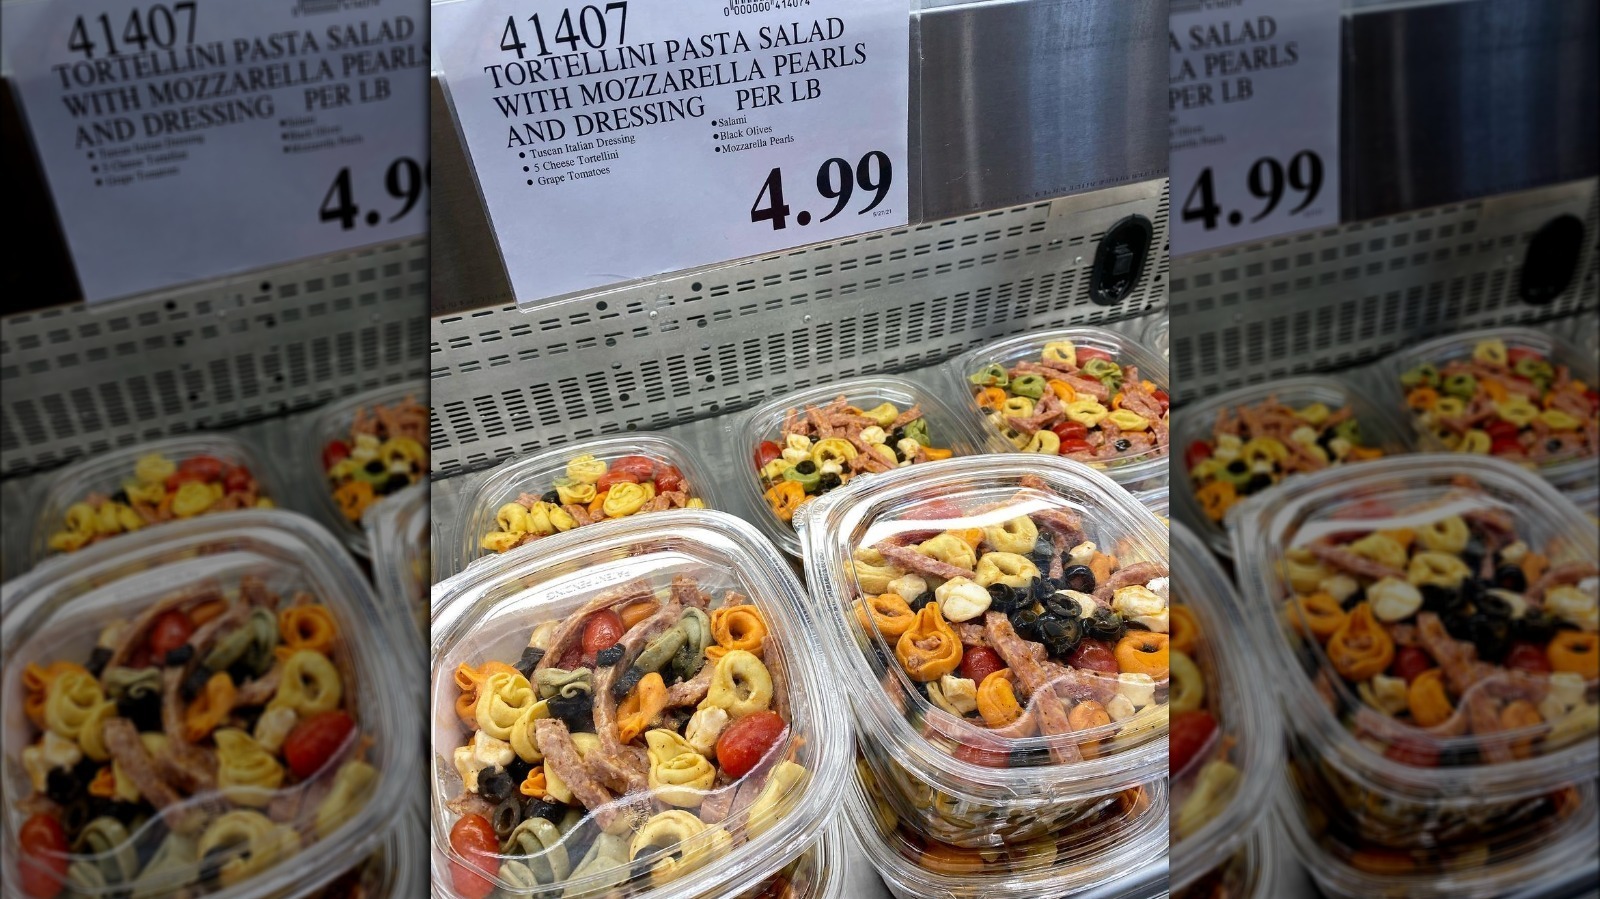 Costco Shoppers Can't Stand This Tortellini Pasta Salad